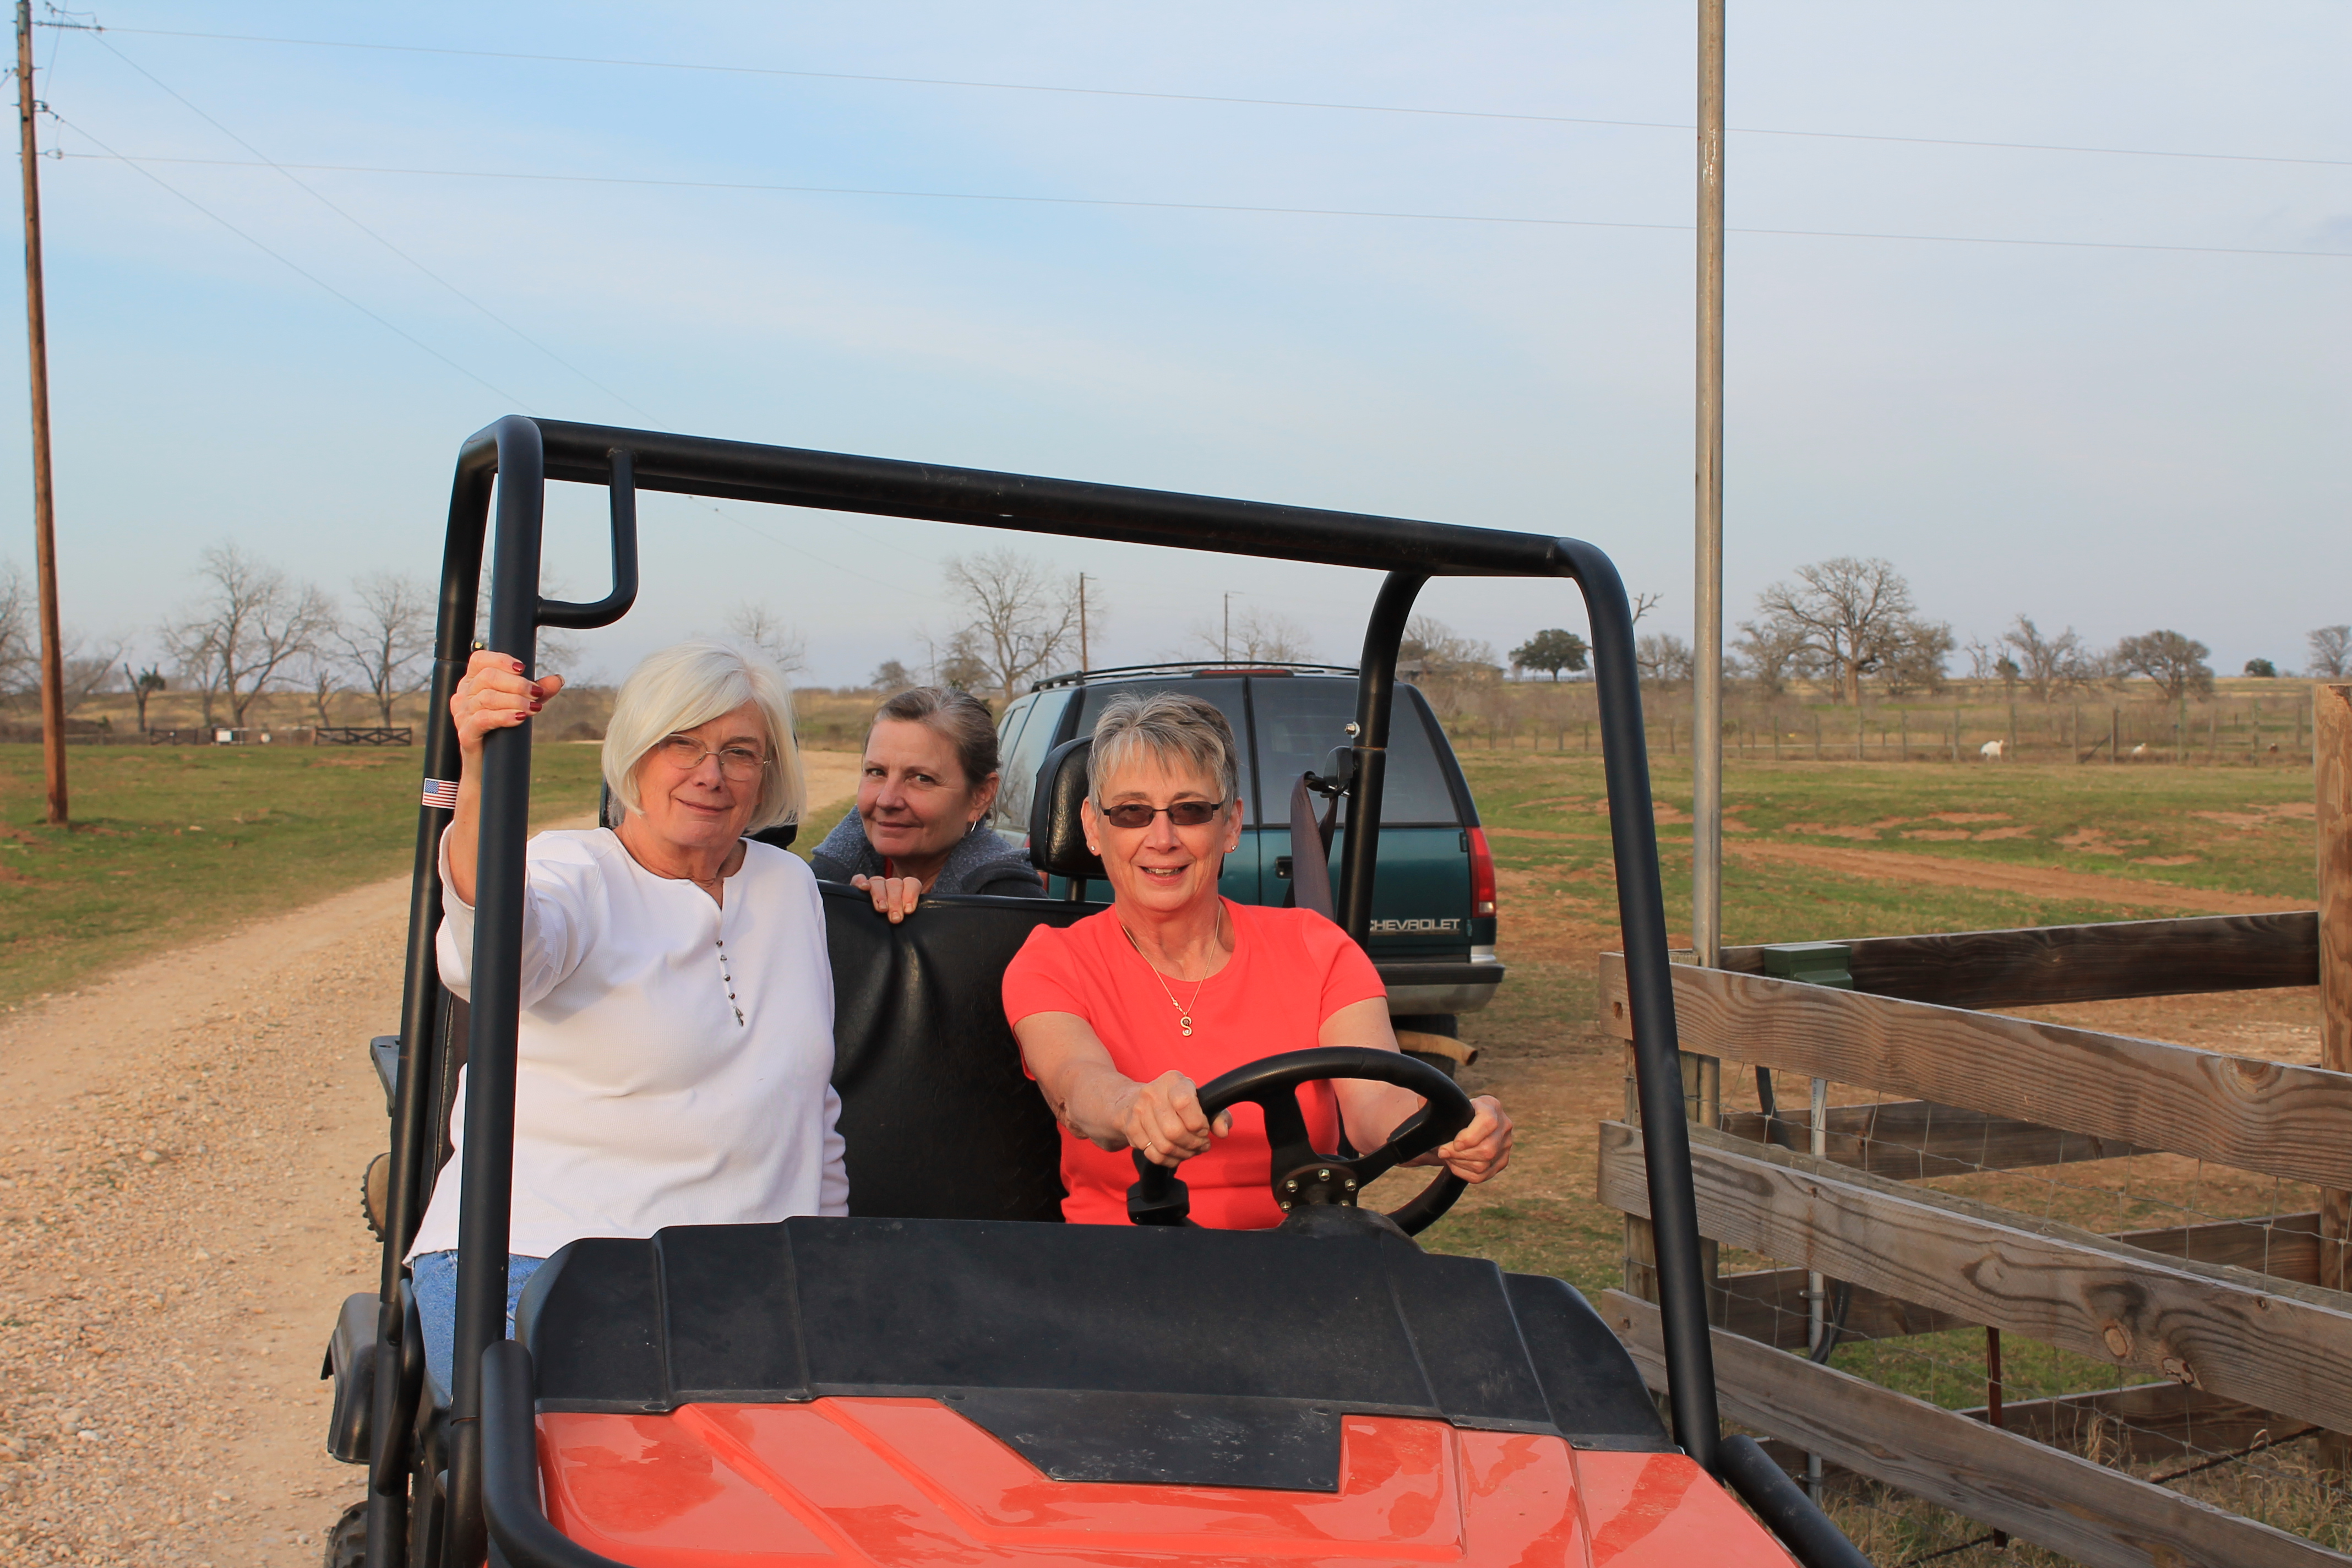 In Texas  on Pat's ranch.  Carol, Pat (in the back), and Jan.